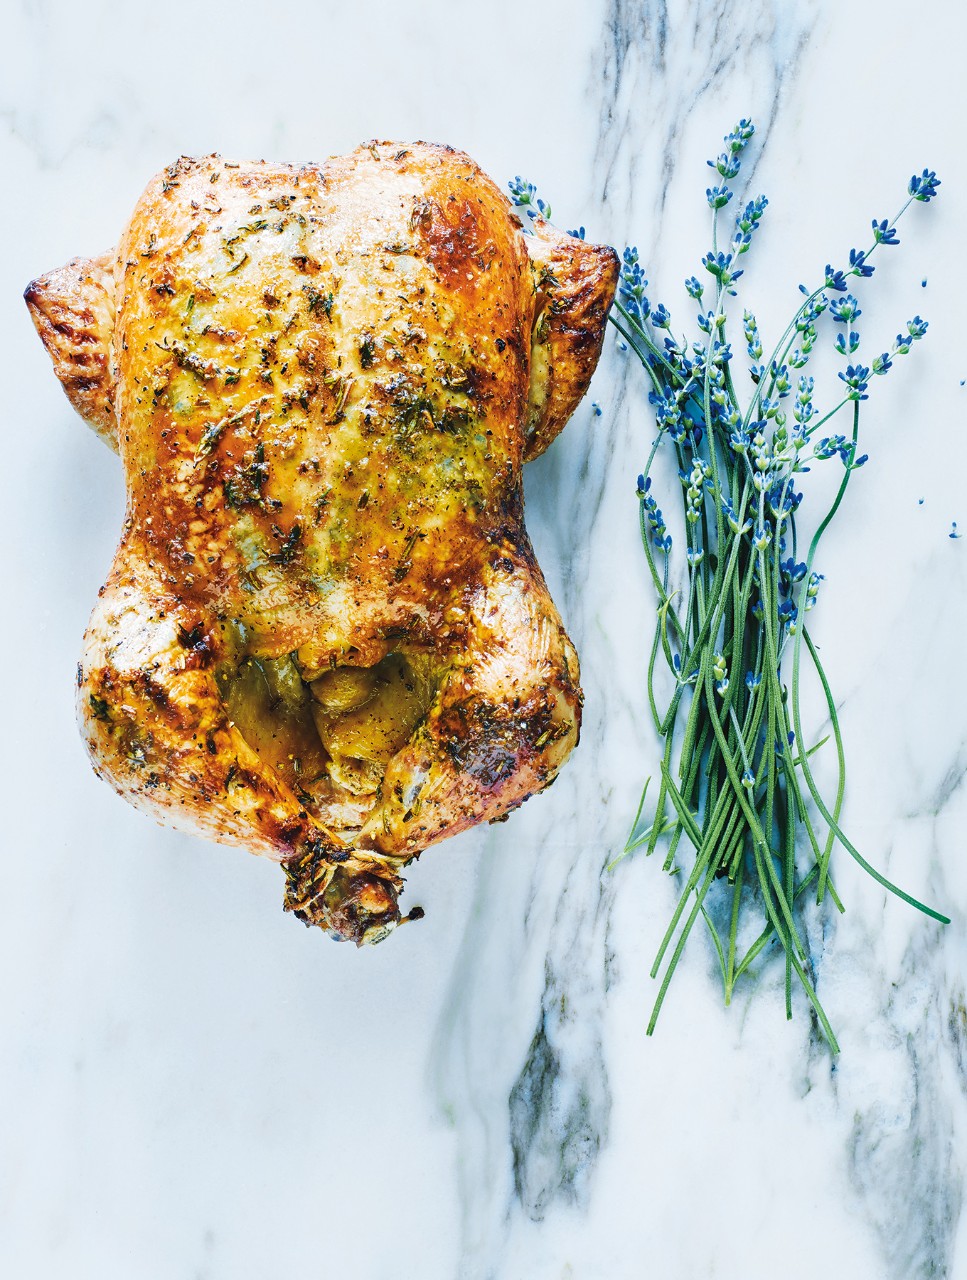 Roasted Chicken with Lavender & Provençal Herbs